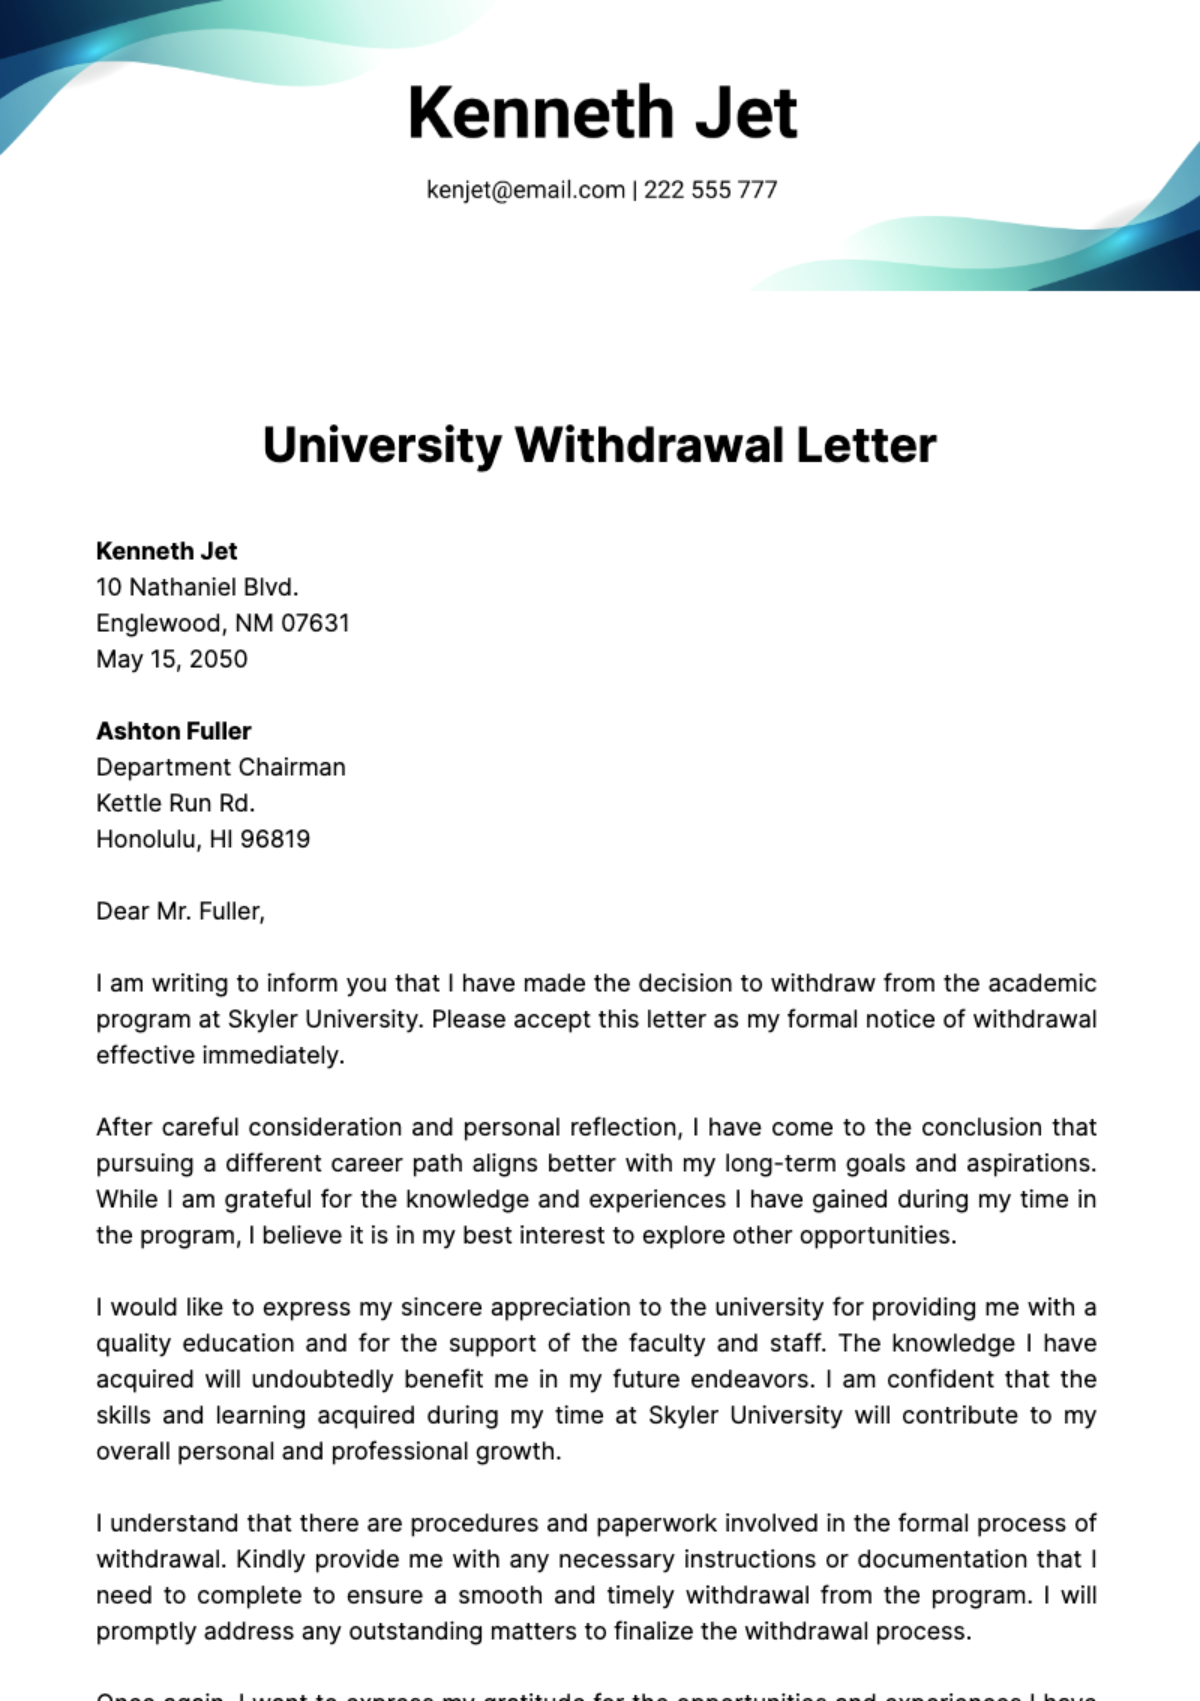 University Withdrawal Letter Template